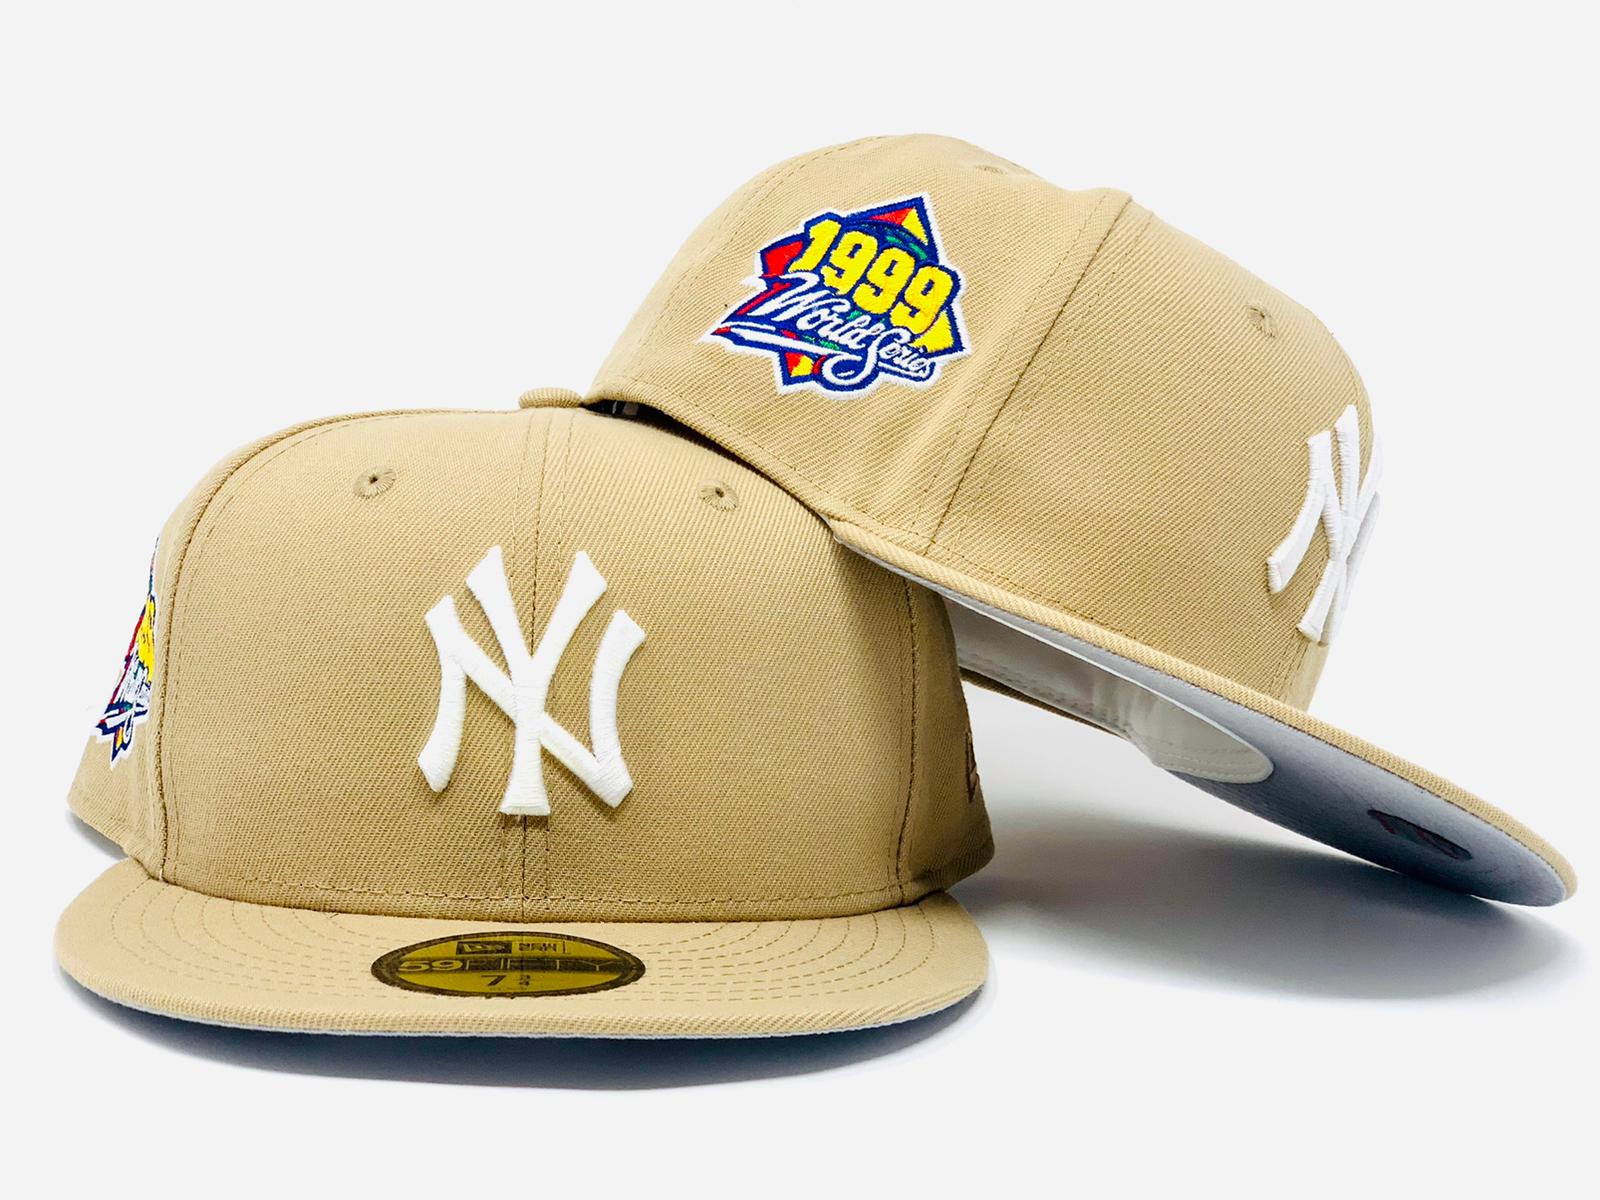 MLB STORE NYC - SOL gets New Era Yankees fitted caps for a fan